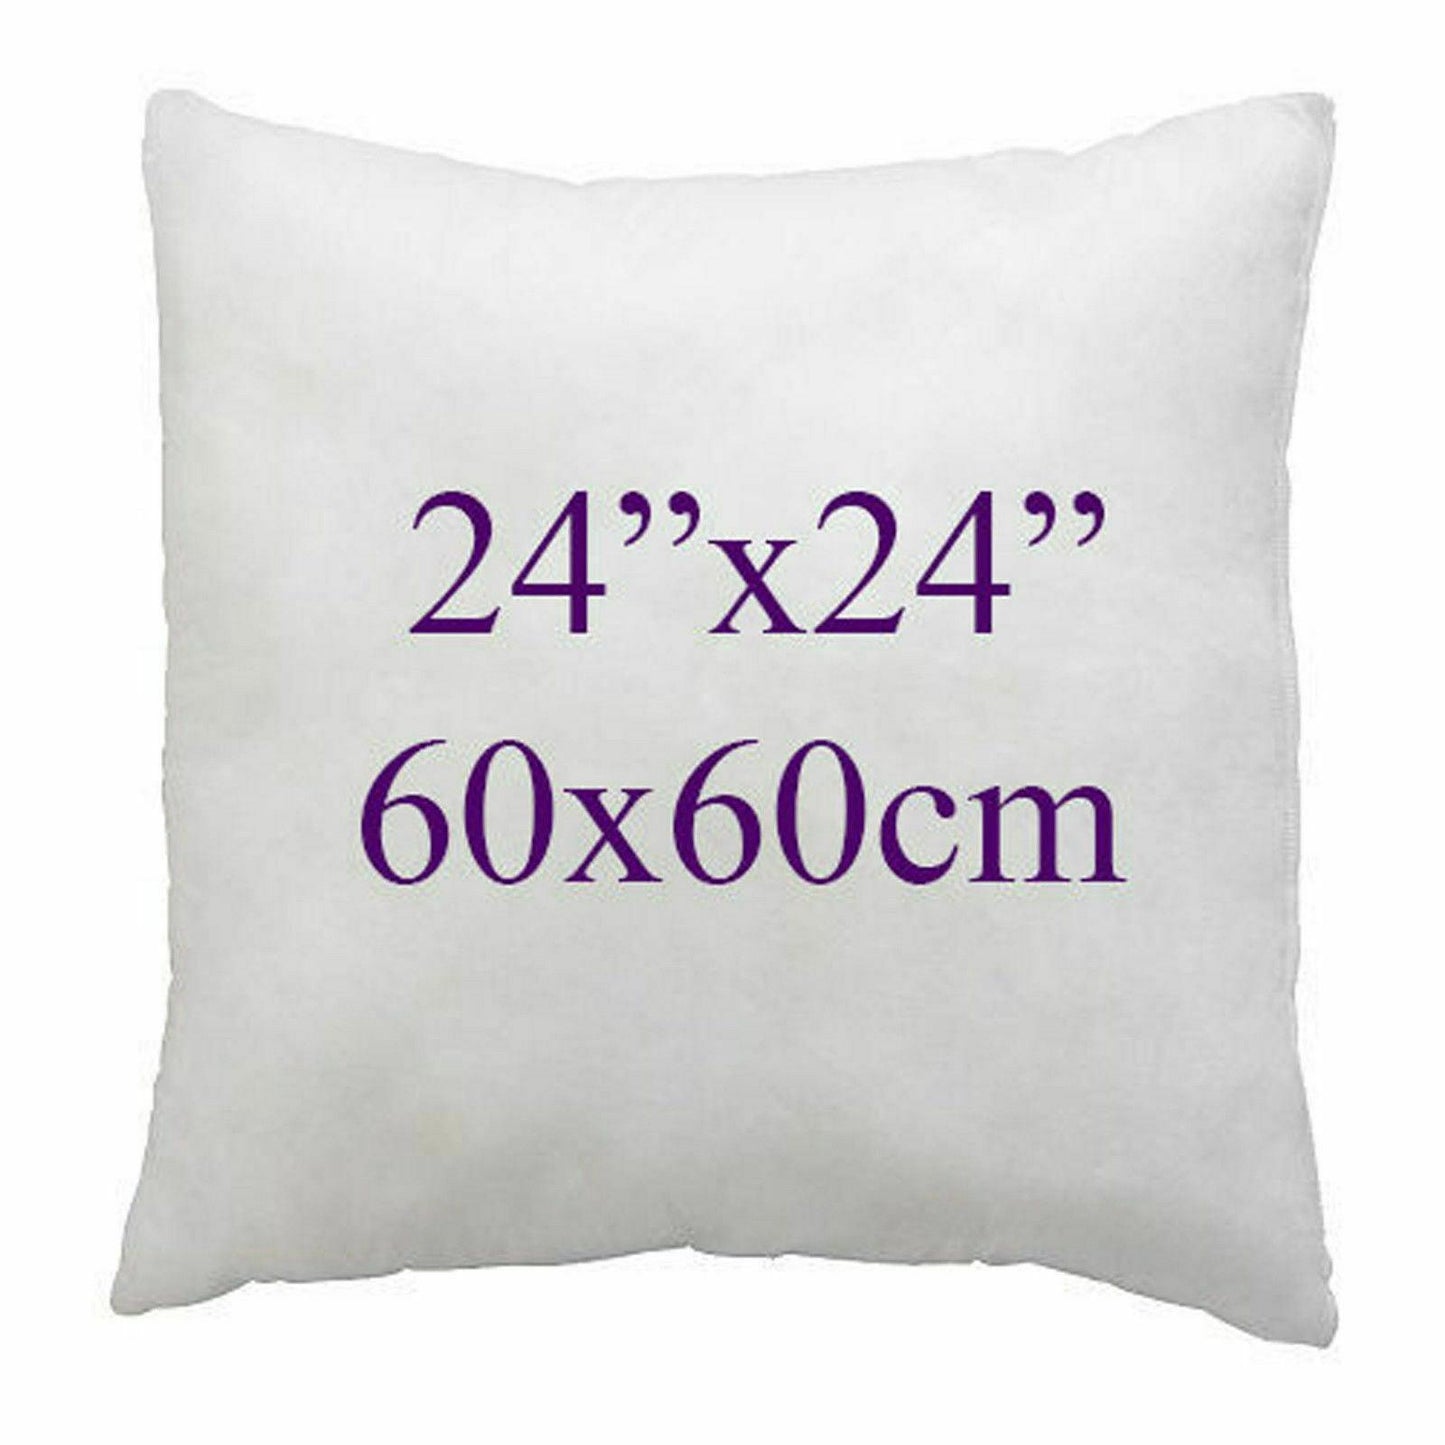 Duck Feather Cushion Pad Inner Insert Filler Scatter 100% Cotton Cover Extra Filled Plump Square Cushion - Arlinens